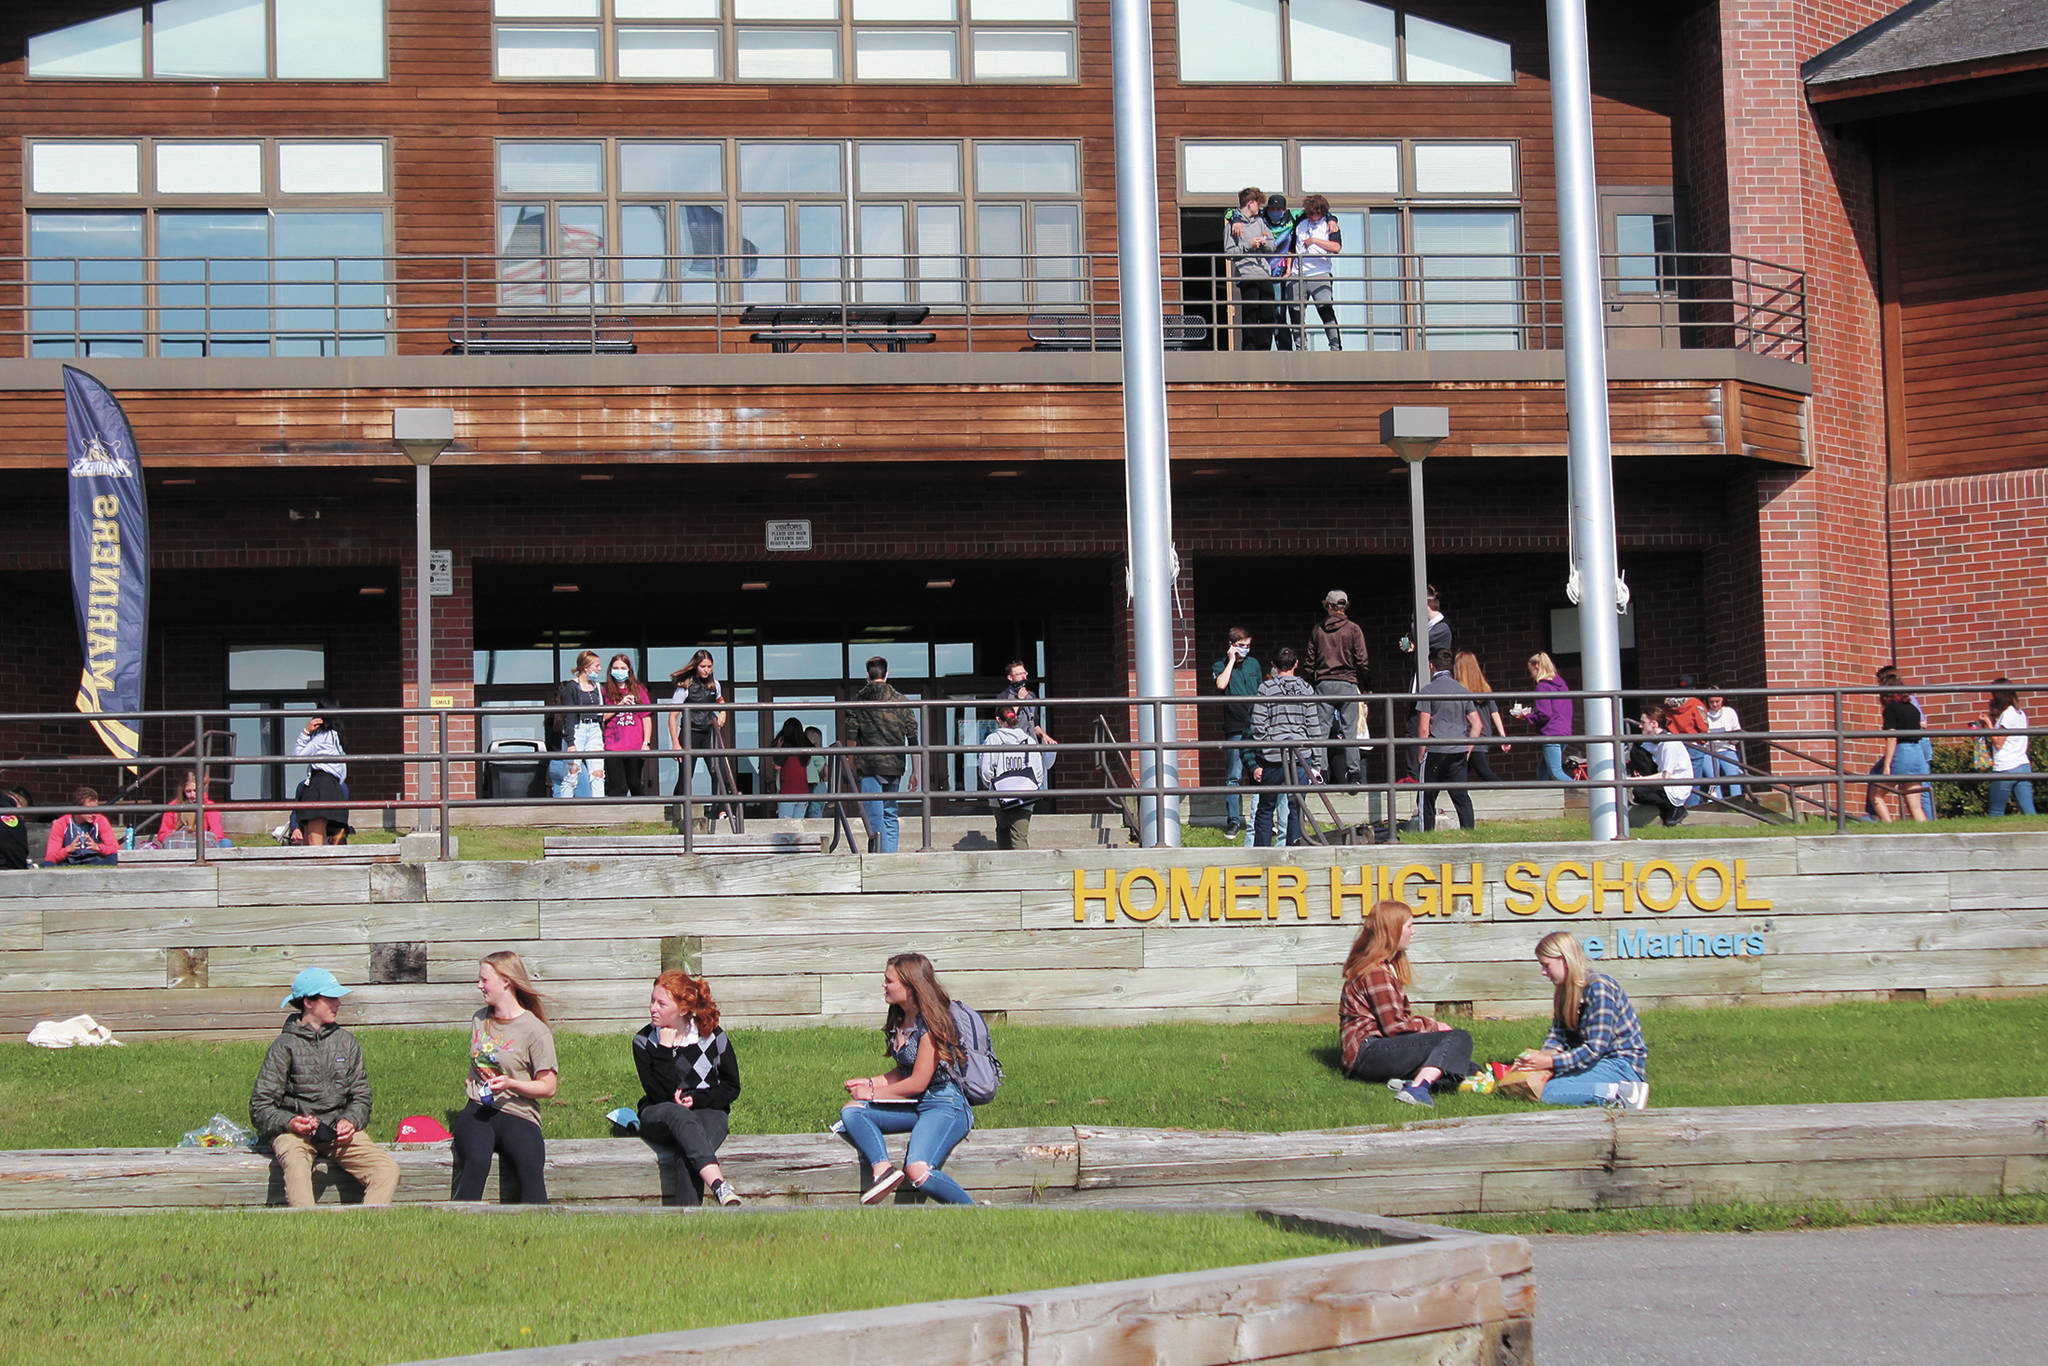 Homer High School students finish eating lunch outside the school while others make their way back into the building for the next class period on Monday, Aug. 24, 2020 in Homer, Alaska. (Photo by Megan Pacer/Homer News)